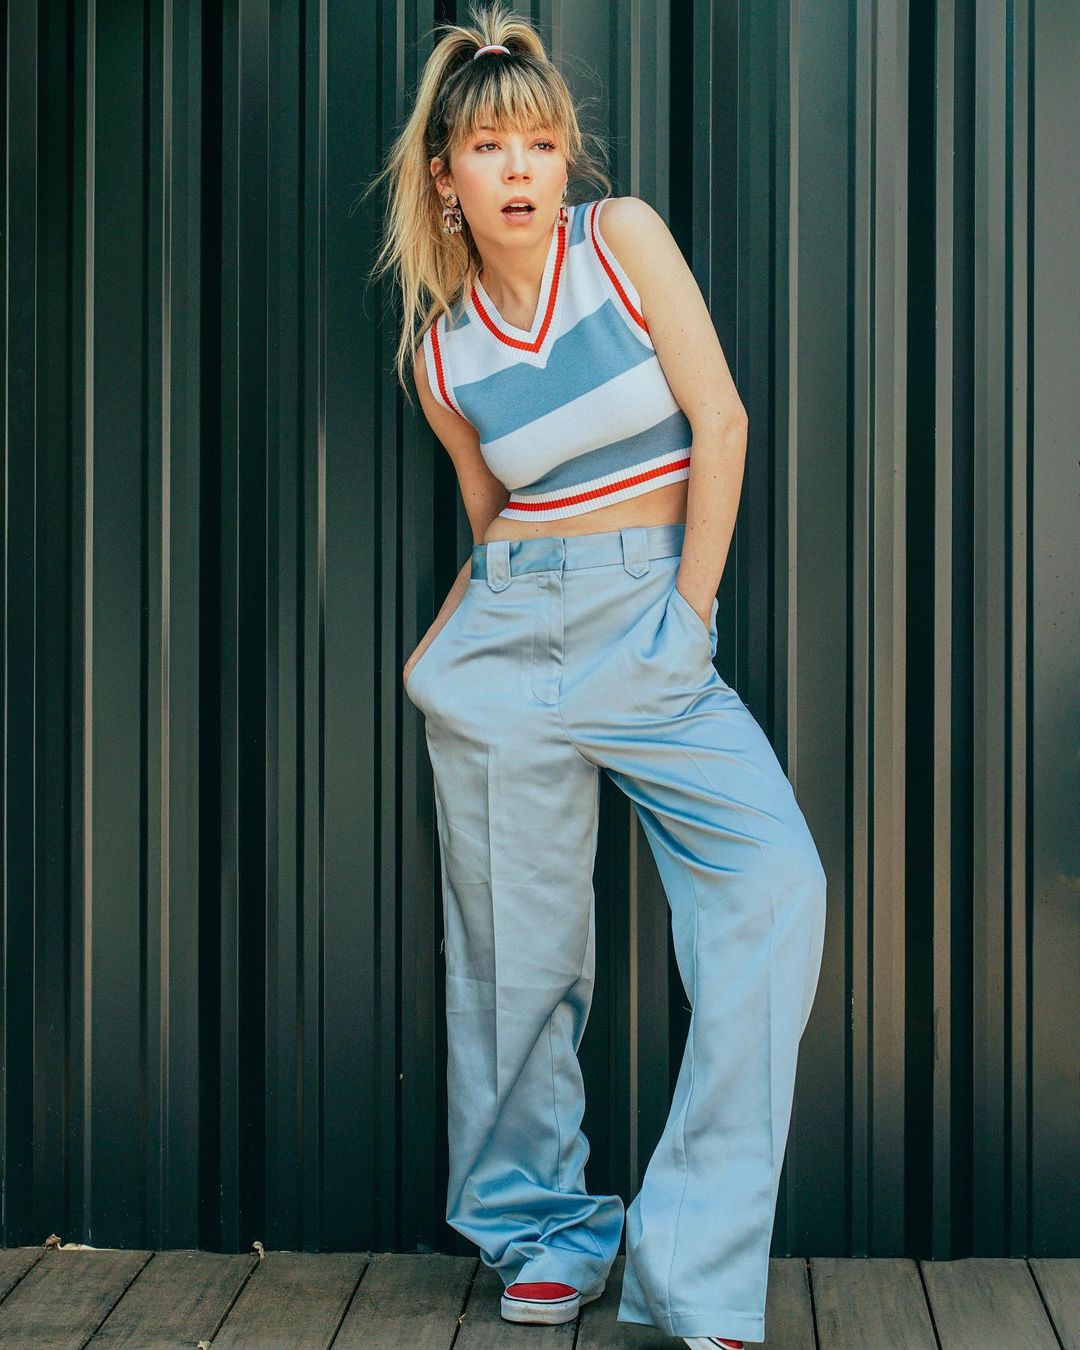 Jennette mccurdy 6 hottest pics, jennette mccurdy 6 instagram